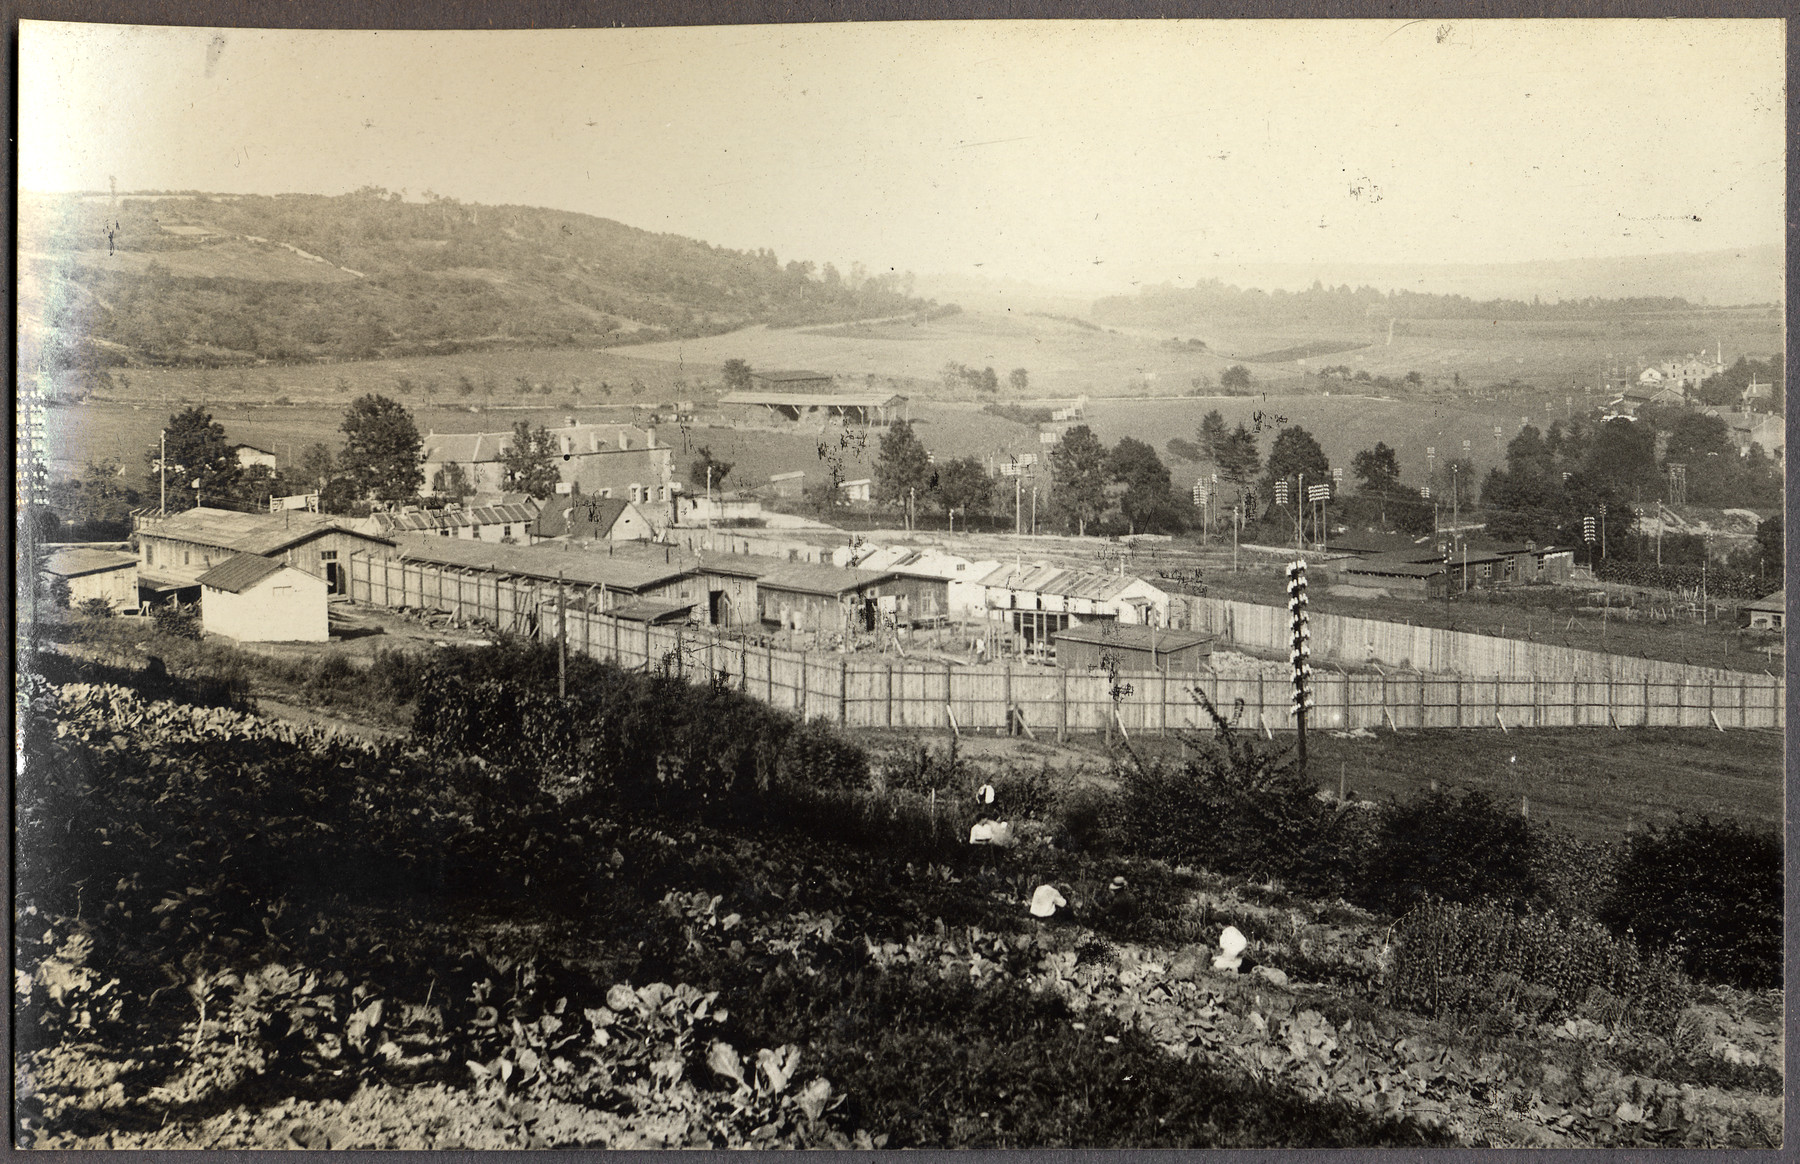 View of the POW camp at Montmedy, France where Walter Landé served as a German medical officer.